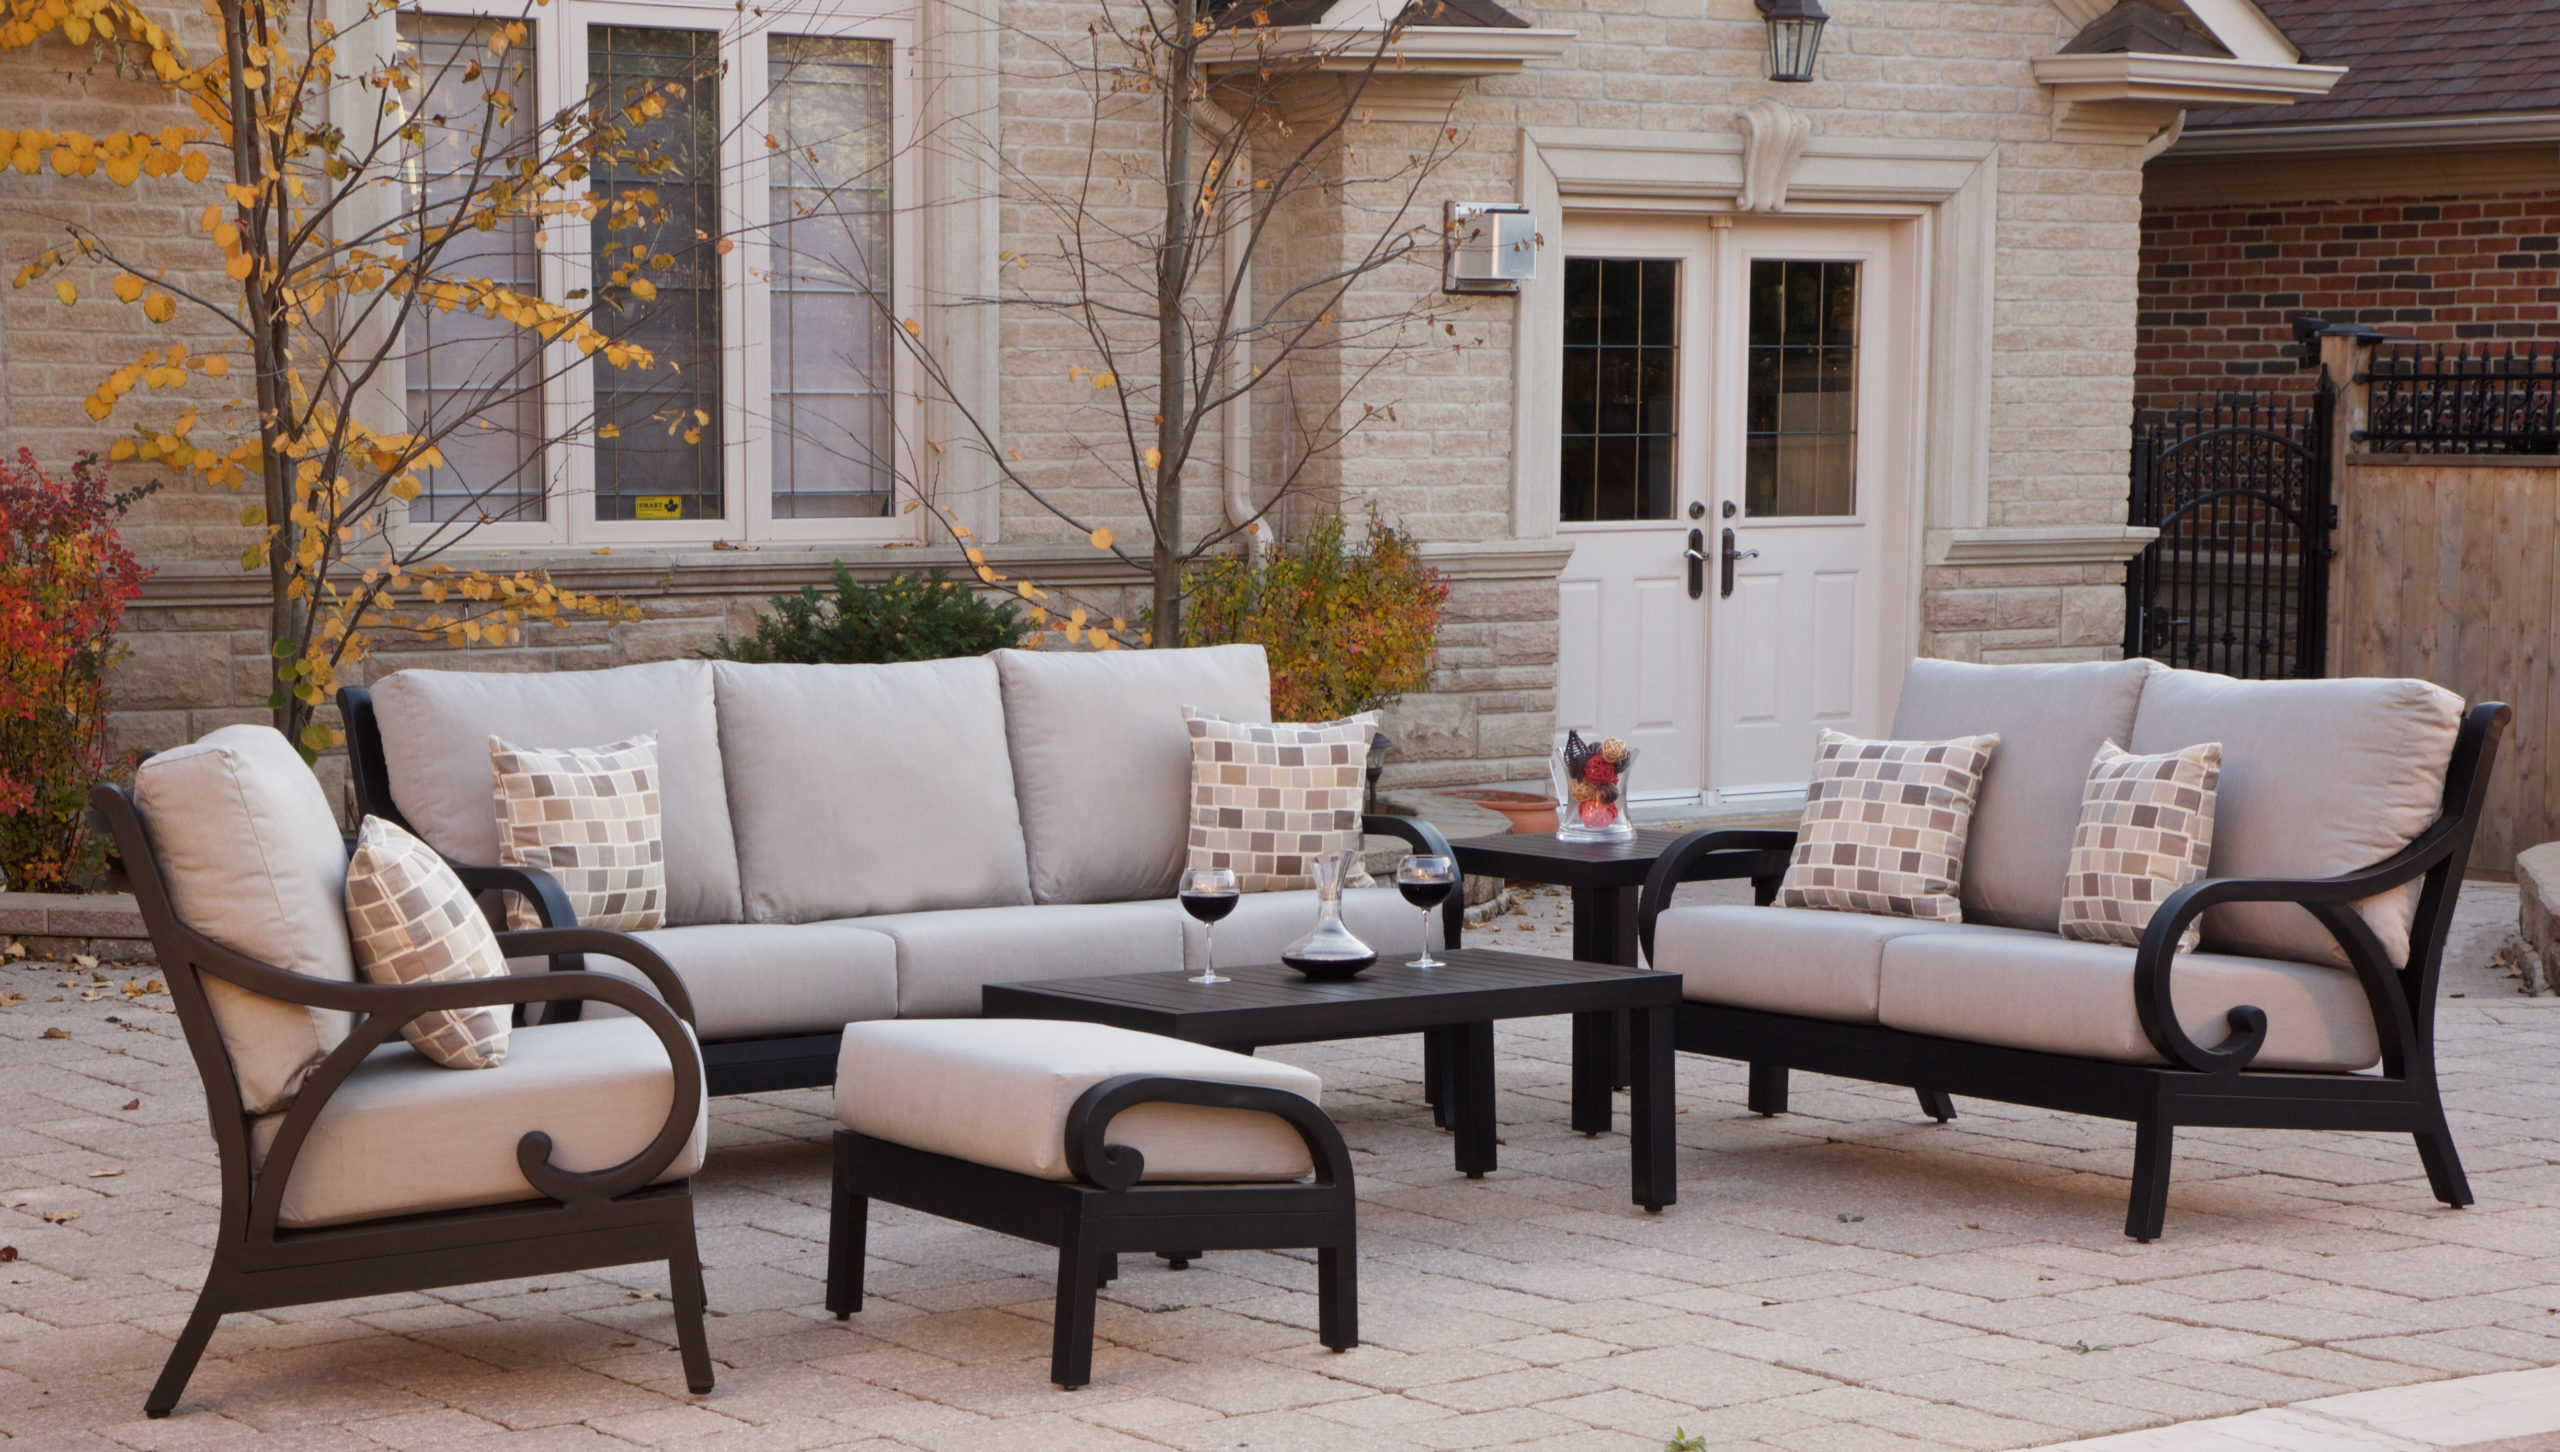 Protege Casual - Outdoor Patio Furniture+Athens Collection